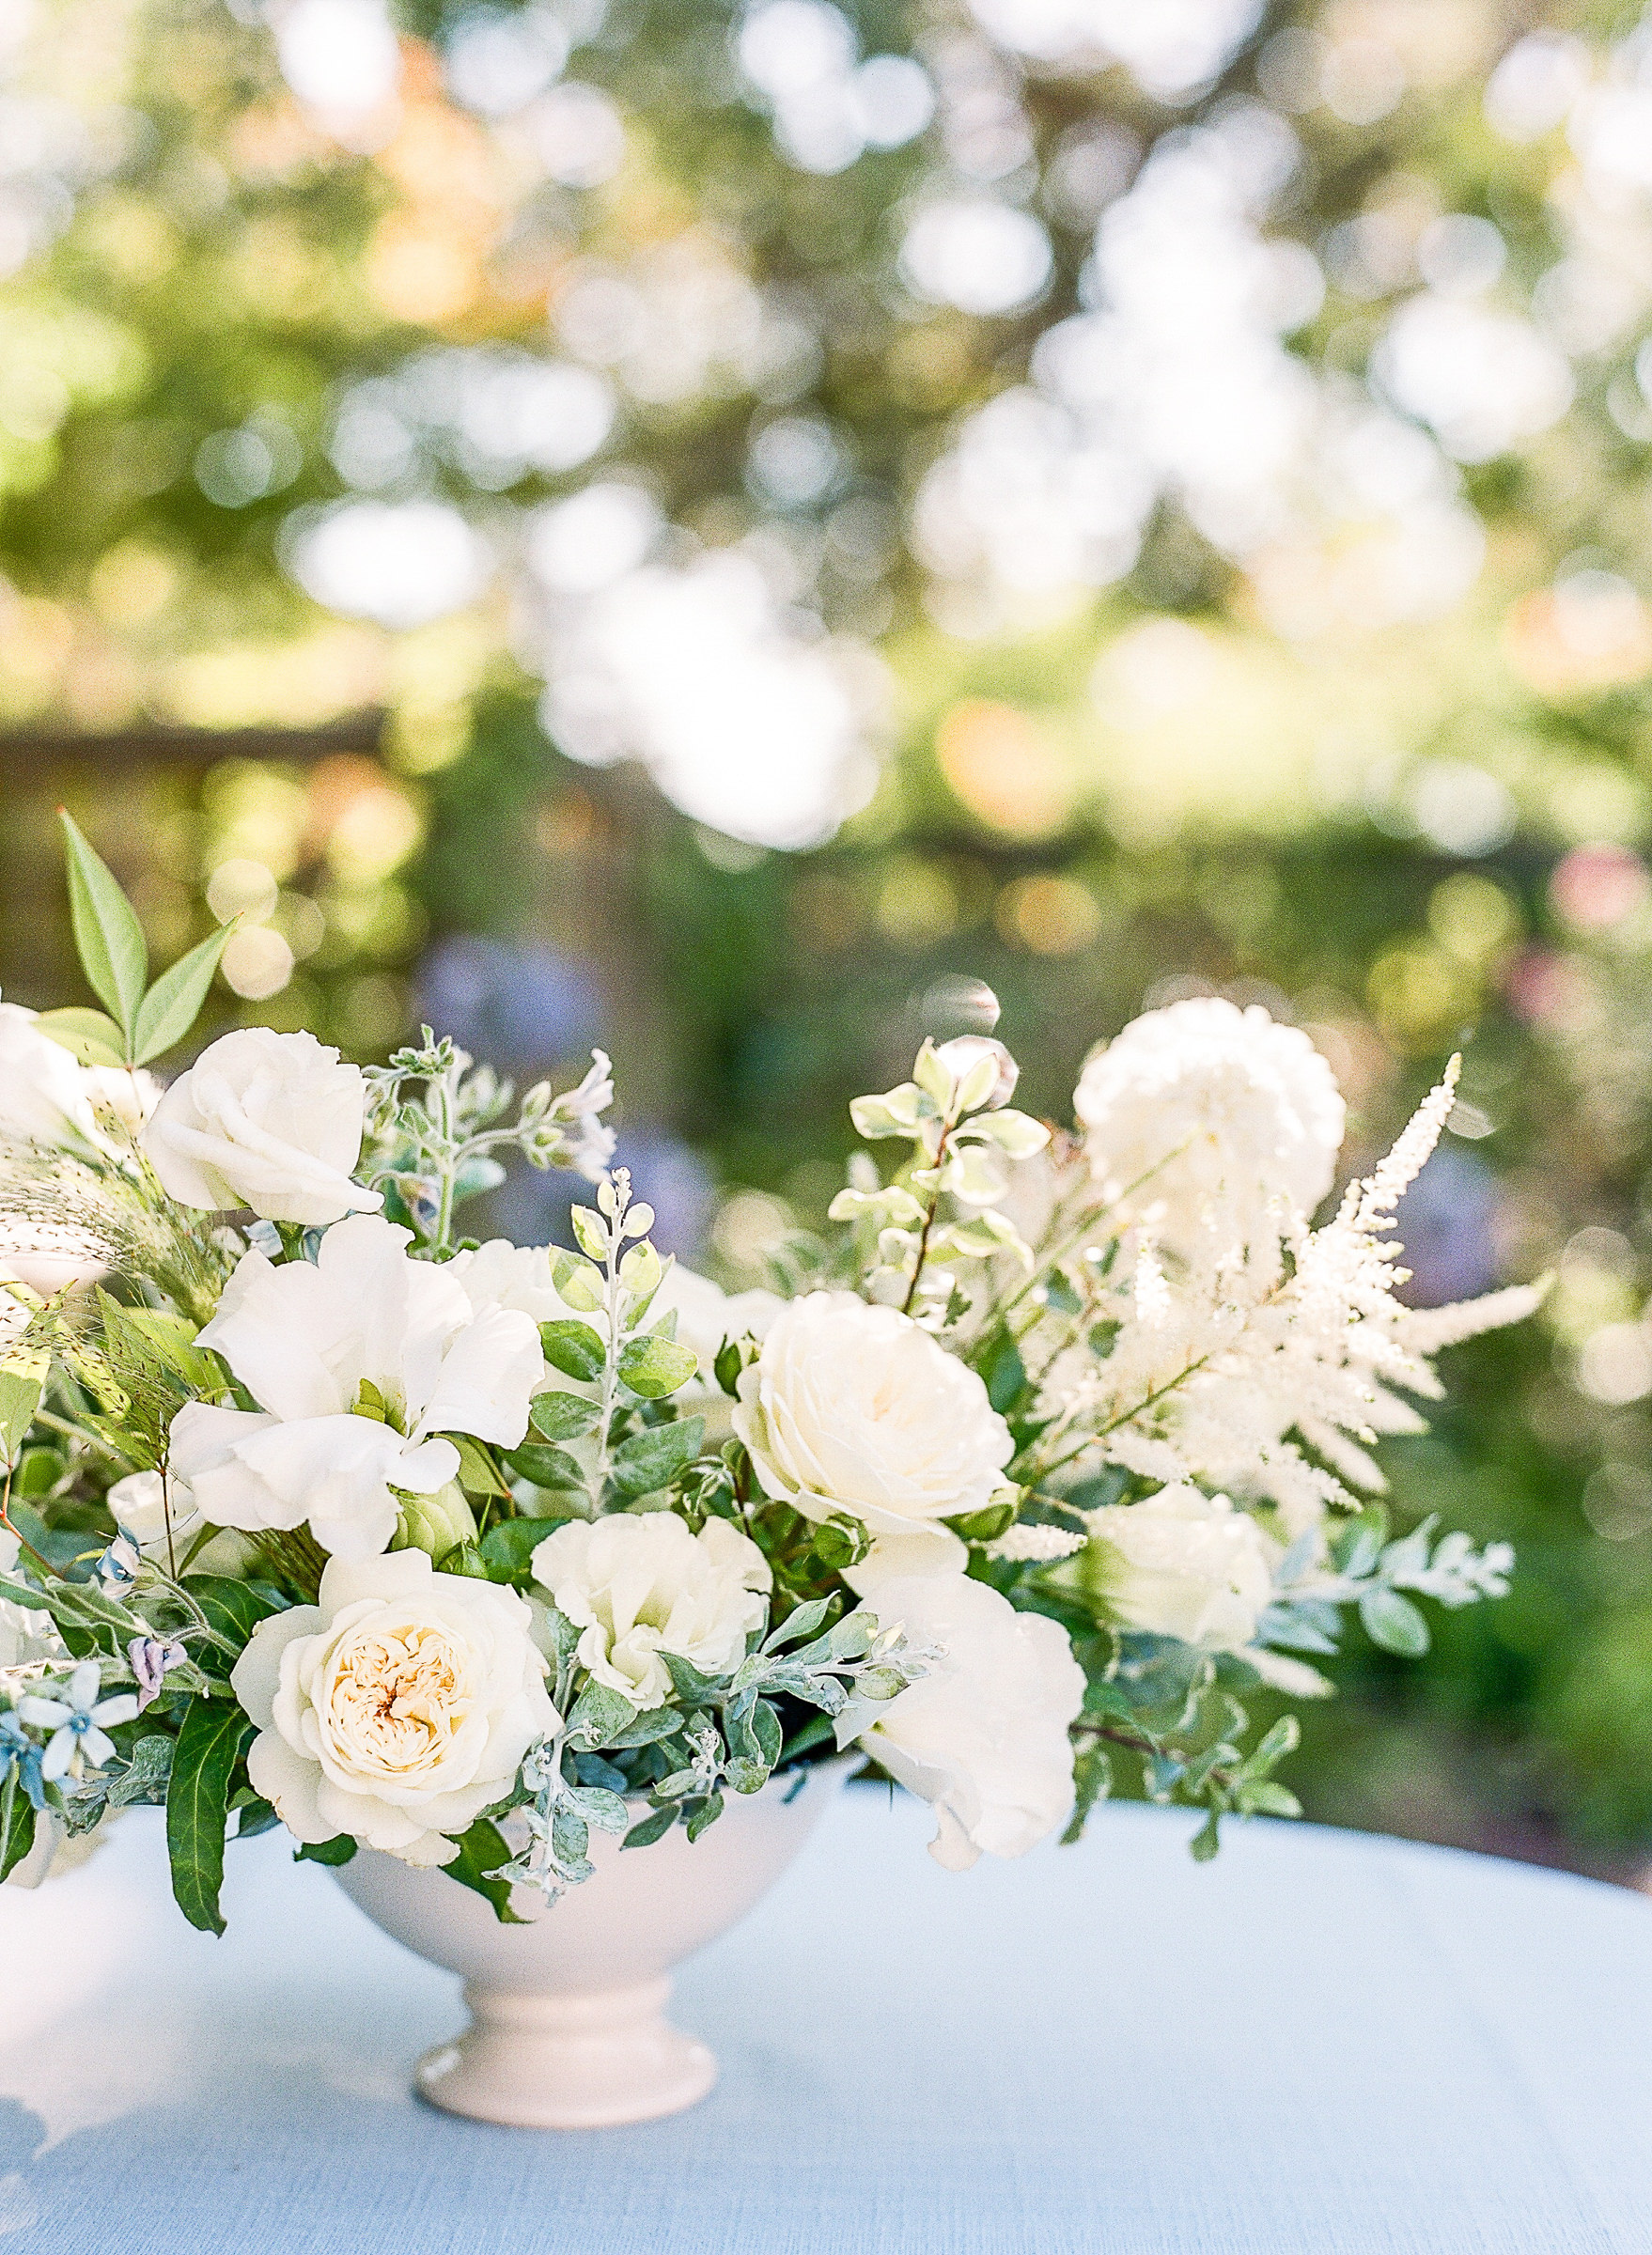 Stunning white floral centerpiece by Allie of Bloomwell and Co with small touches of blue